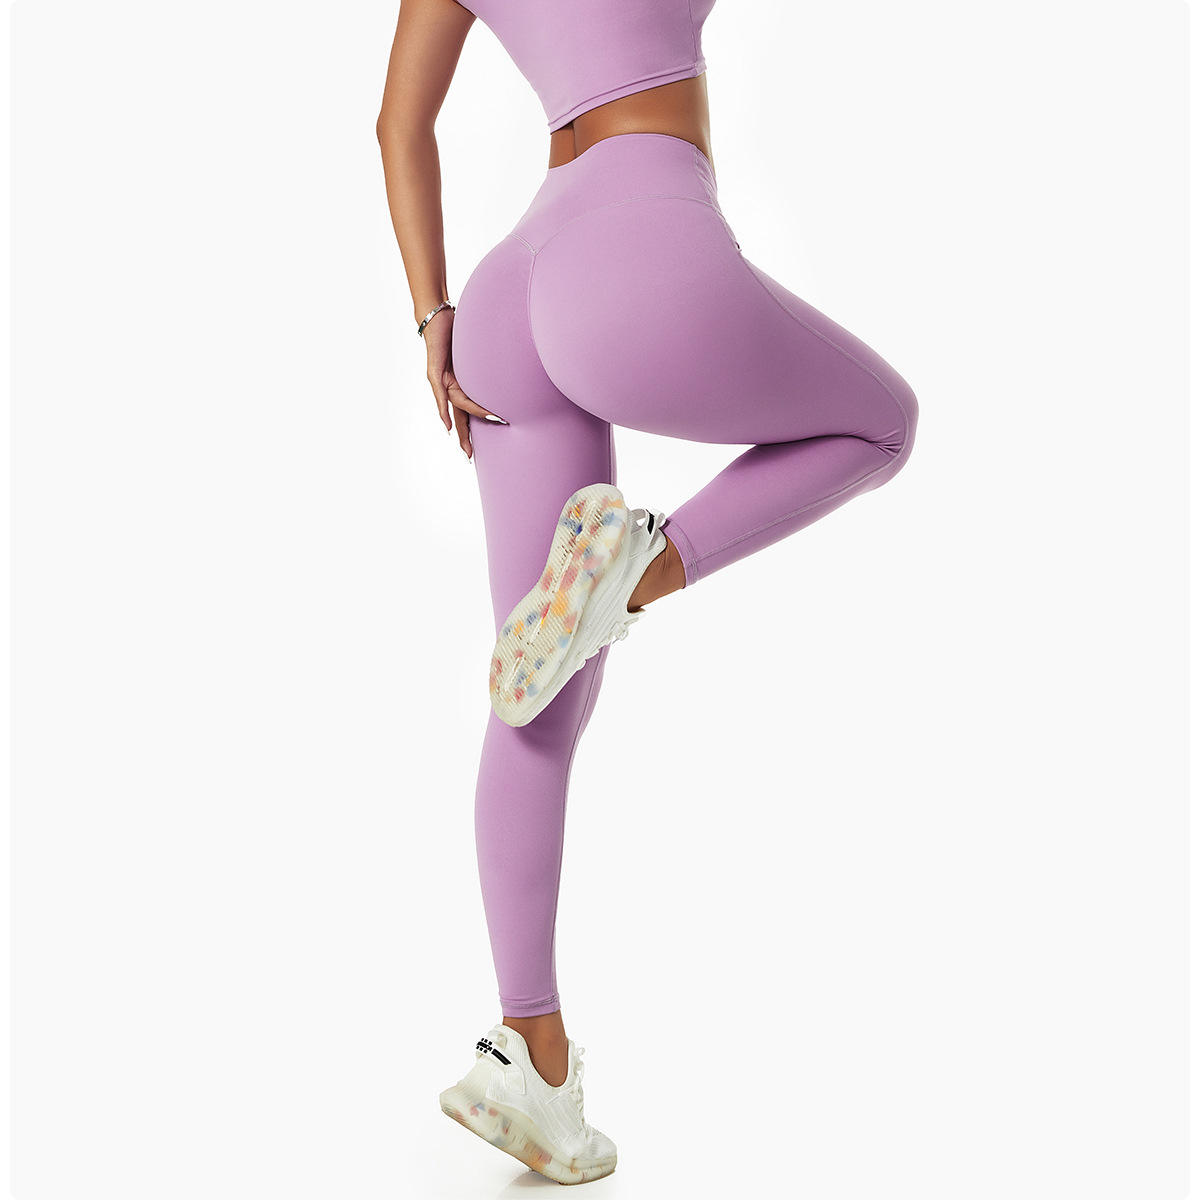 Products Description Name Fashion Sexy Outdoor Yoga Wear Diagonal Shoulder Leggings Running Naked Fitness Suit Tight Quick Drying Exercise Suit Material Polyester/Nylon Size S-XL Colors As Shown MOQ 2